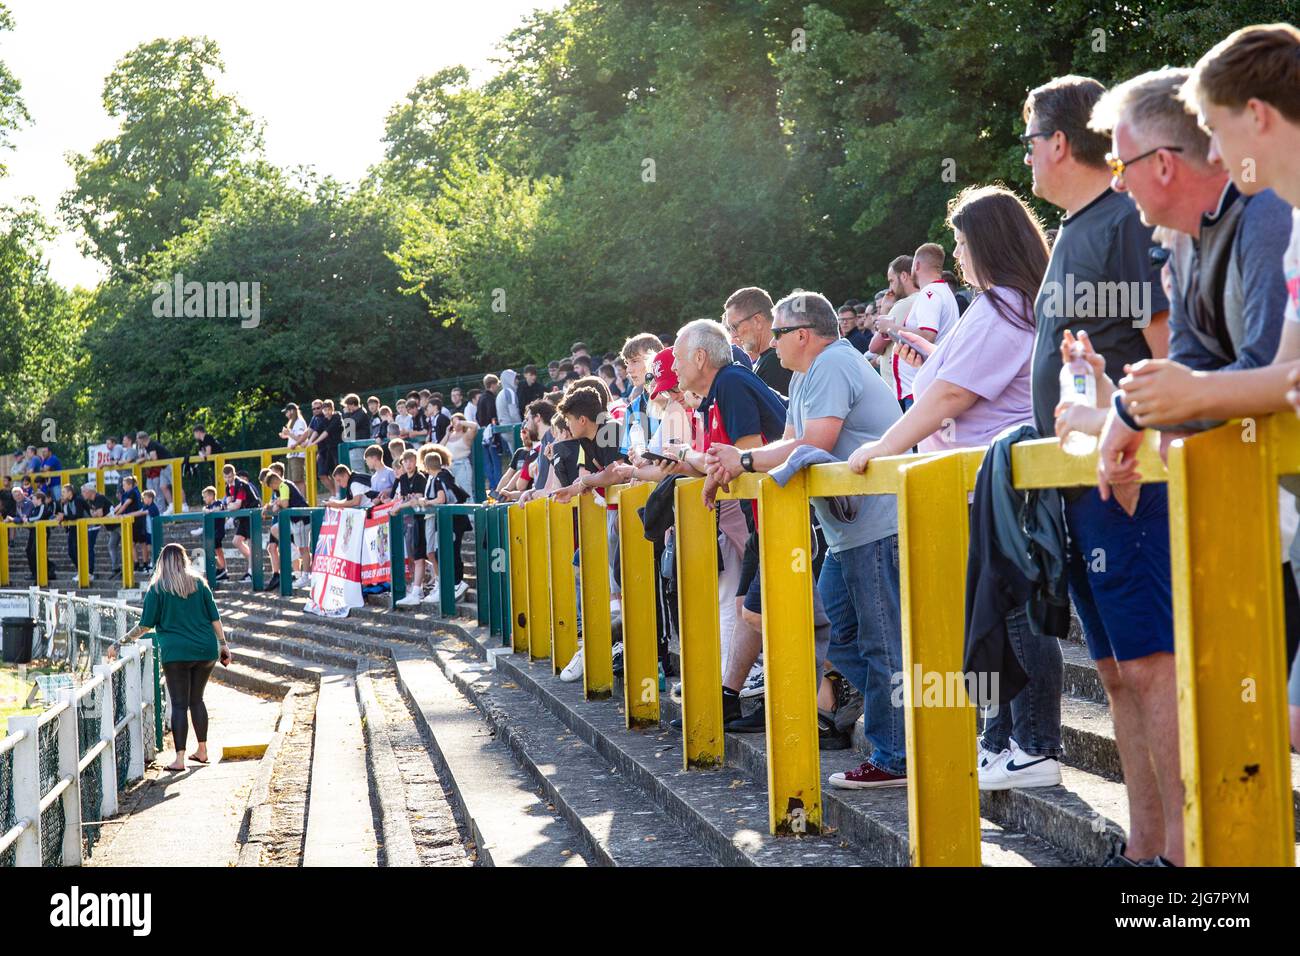 Football spectators watching match from stand at non league football ground in England Stock Photo